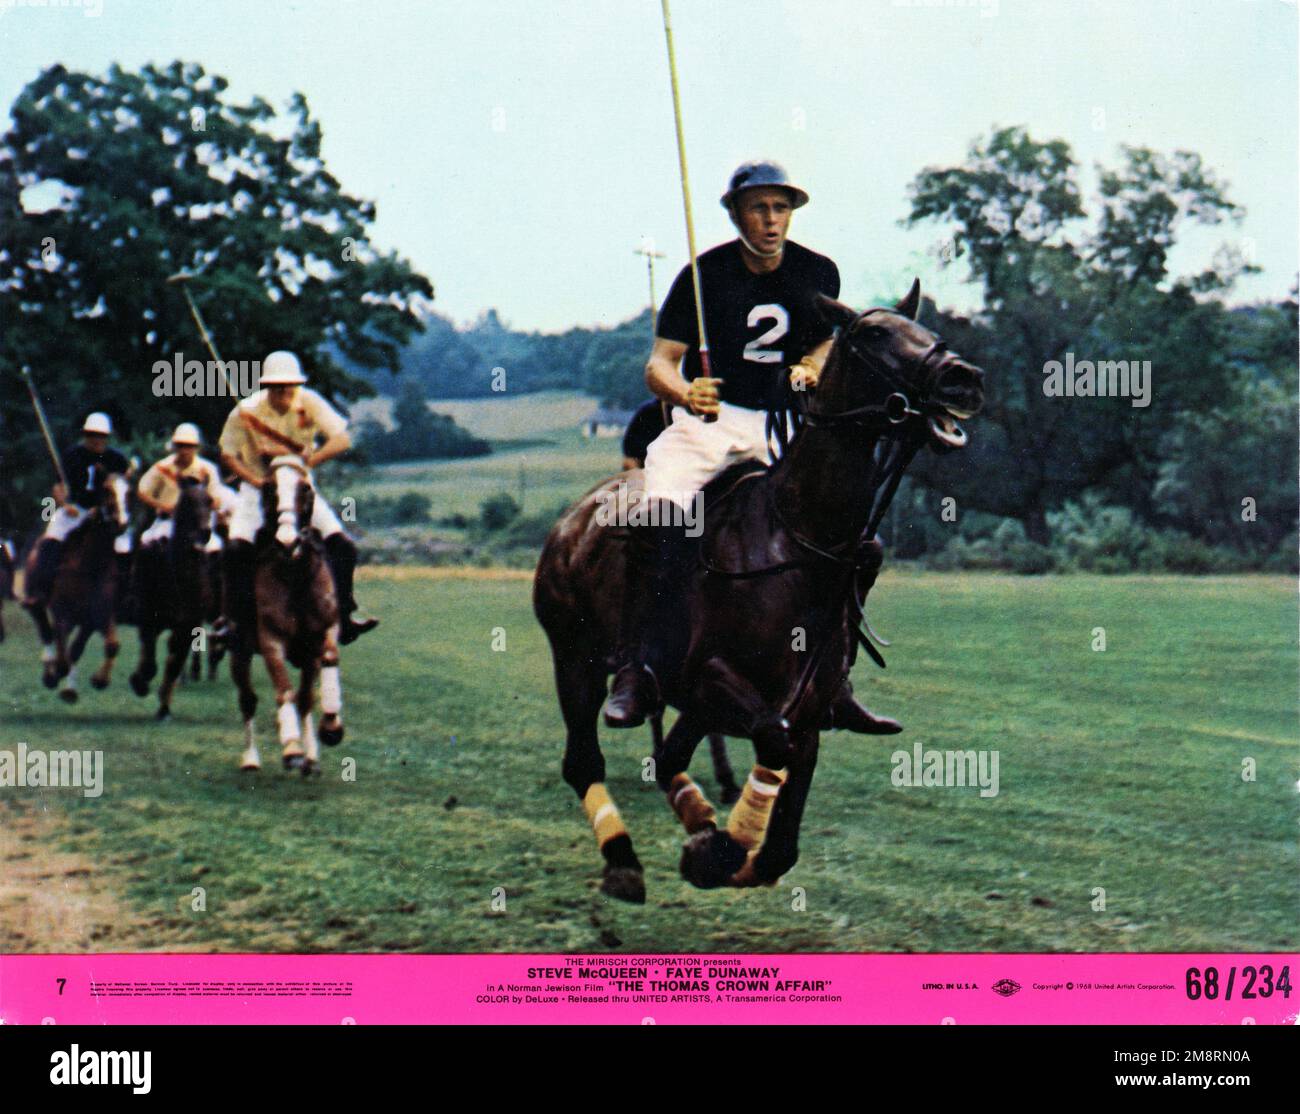 STEVE McQUEEN playing Polo in THE THOMAS CROWN AFFAIR 1968 director NORMAN JEWISON writer Alan Trustman music Michel Legrand Simkoe / Solar Productions / The Mirisch Corporation / United Artists Stock Photo